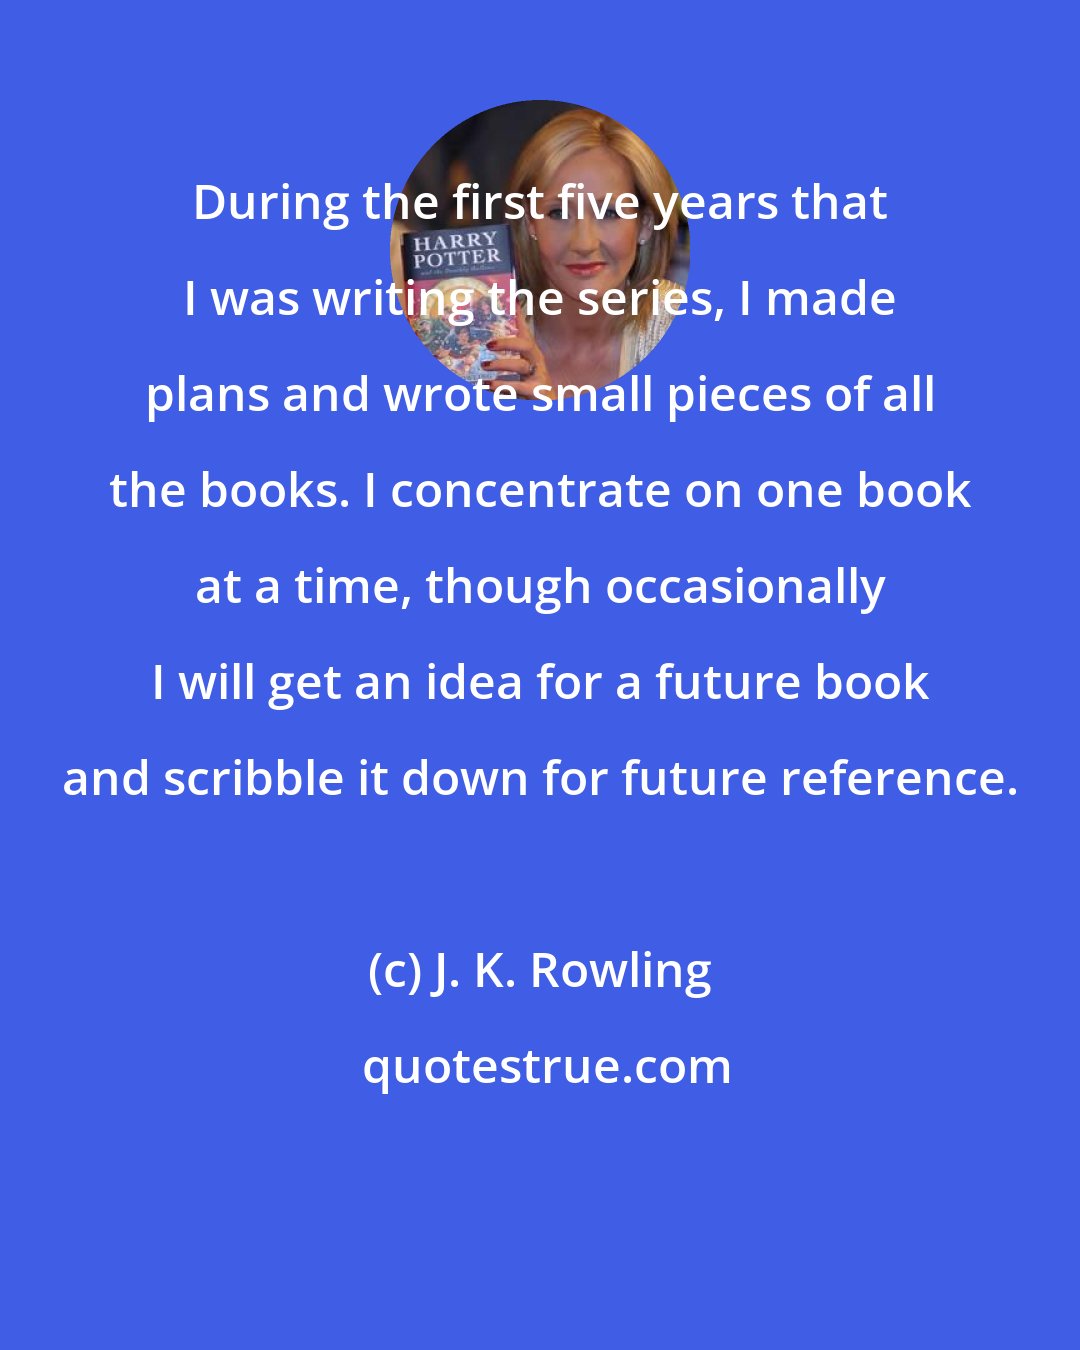 J. K. Rowling: During the first five years that I was writing the series, I made plans and wrote small pieces of all the books. I concentrate on one book at a time, though occasionally I will get an idea for a future book and scribble it down for future reference.